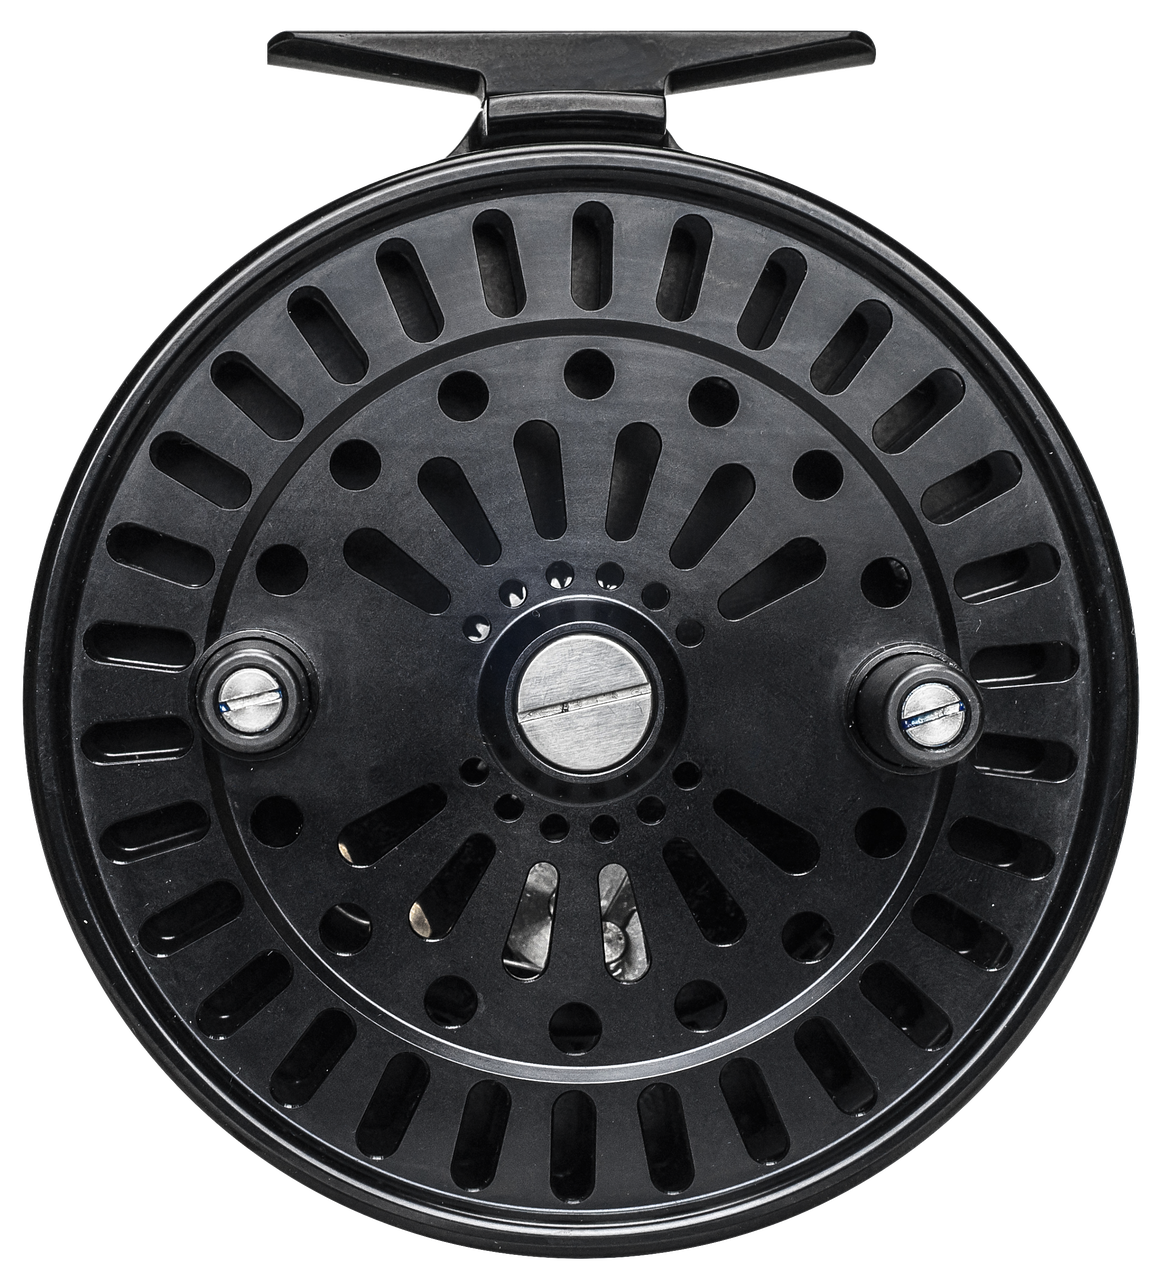 Amundsen Trend X TCP 3x Centerpin Float Reel - Hook, Line and Sinker -  Guelph's #1 Tackle Store Amundsen Trend X TCP 3x Centerpin Float Reel